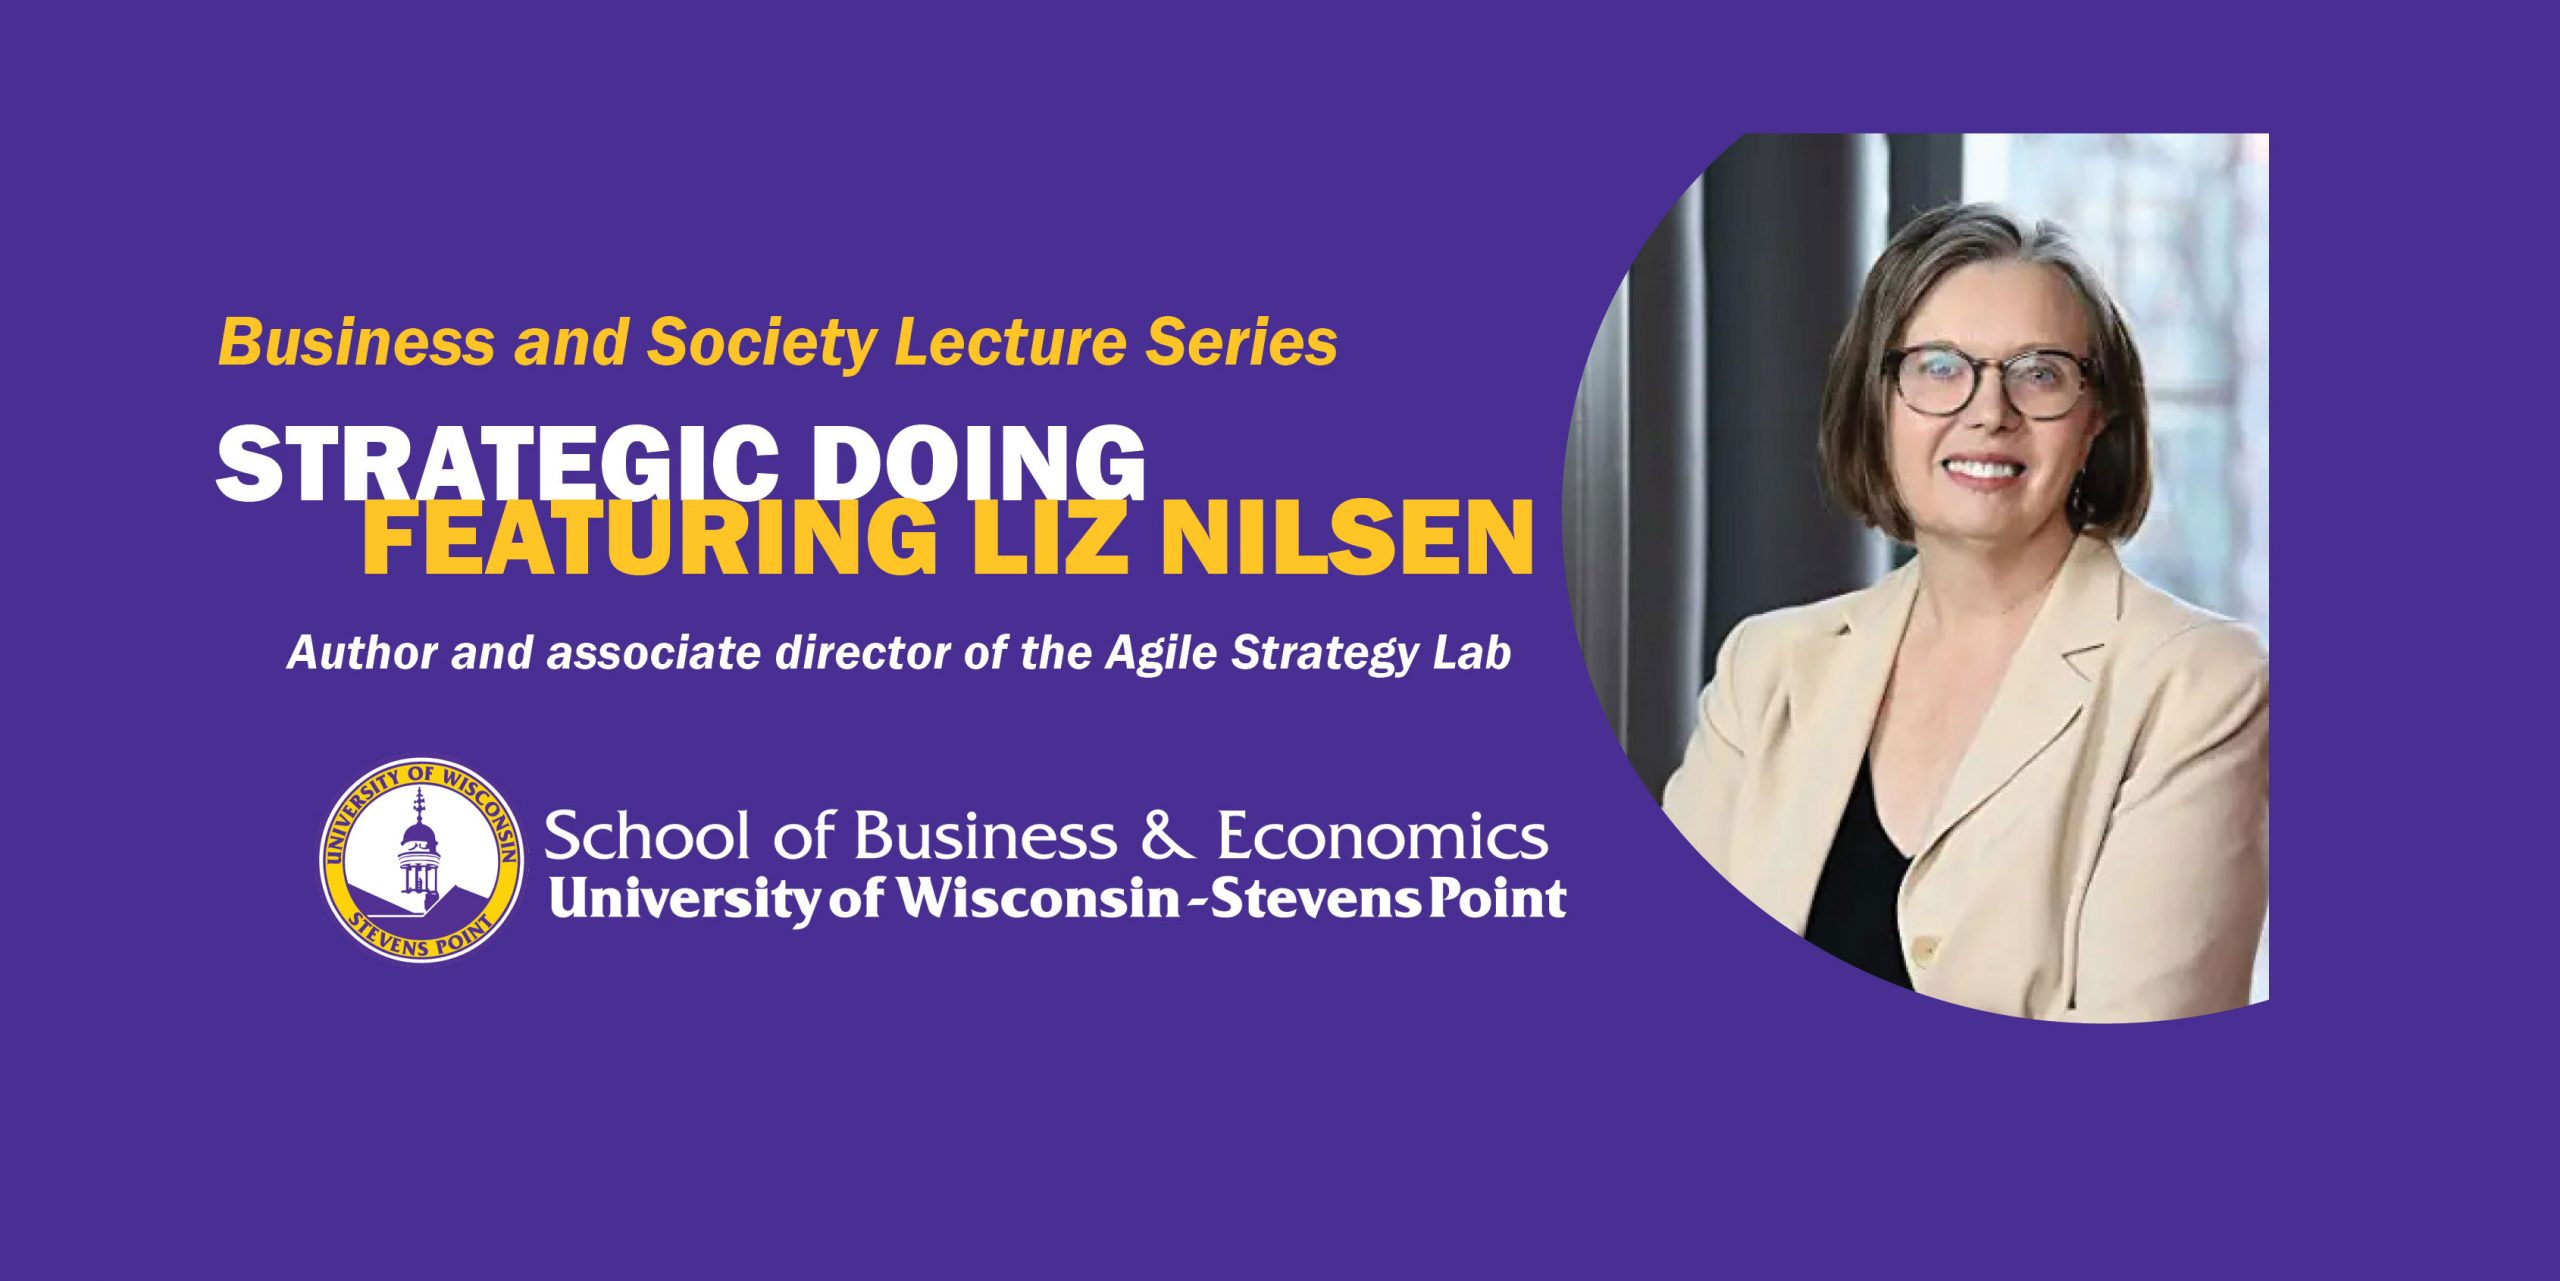 Business and Society Lecture Series: Liz Nilsen